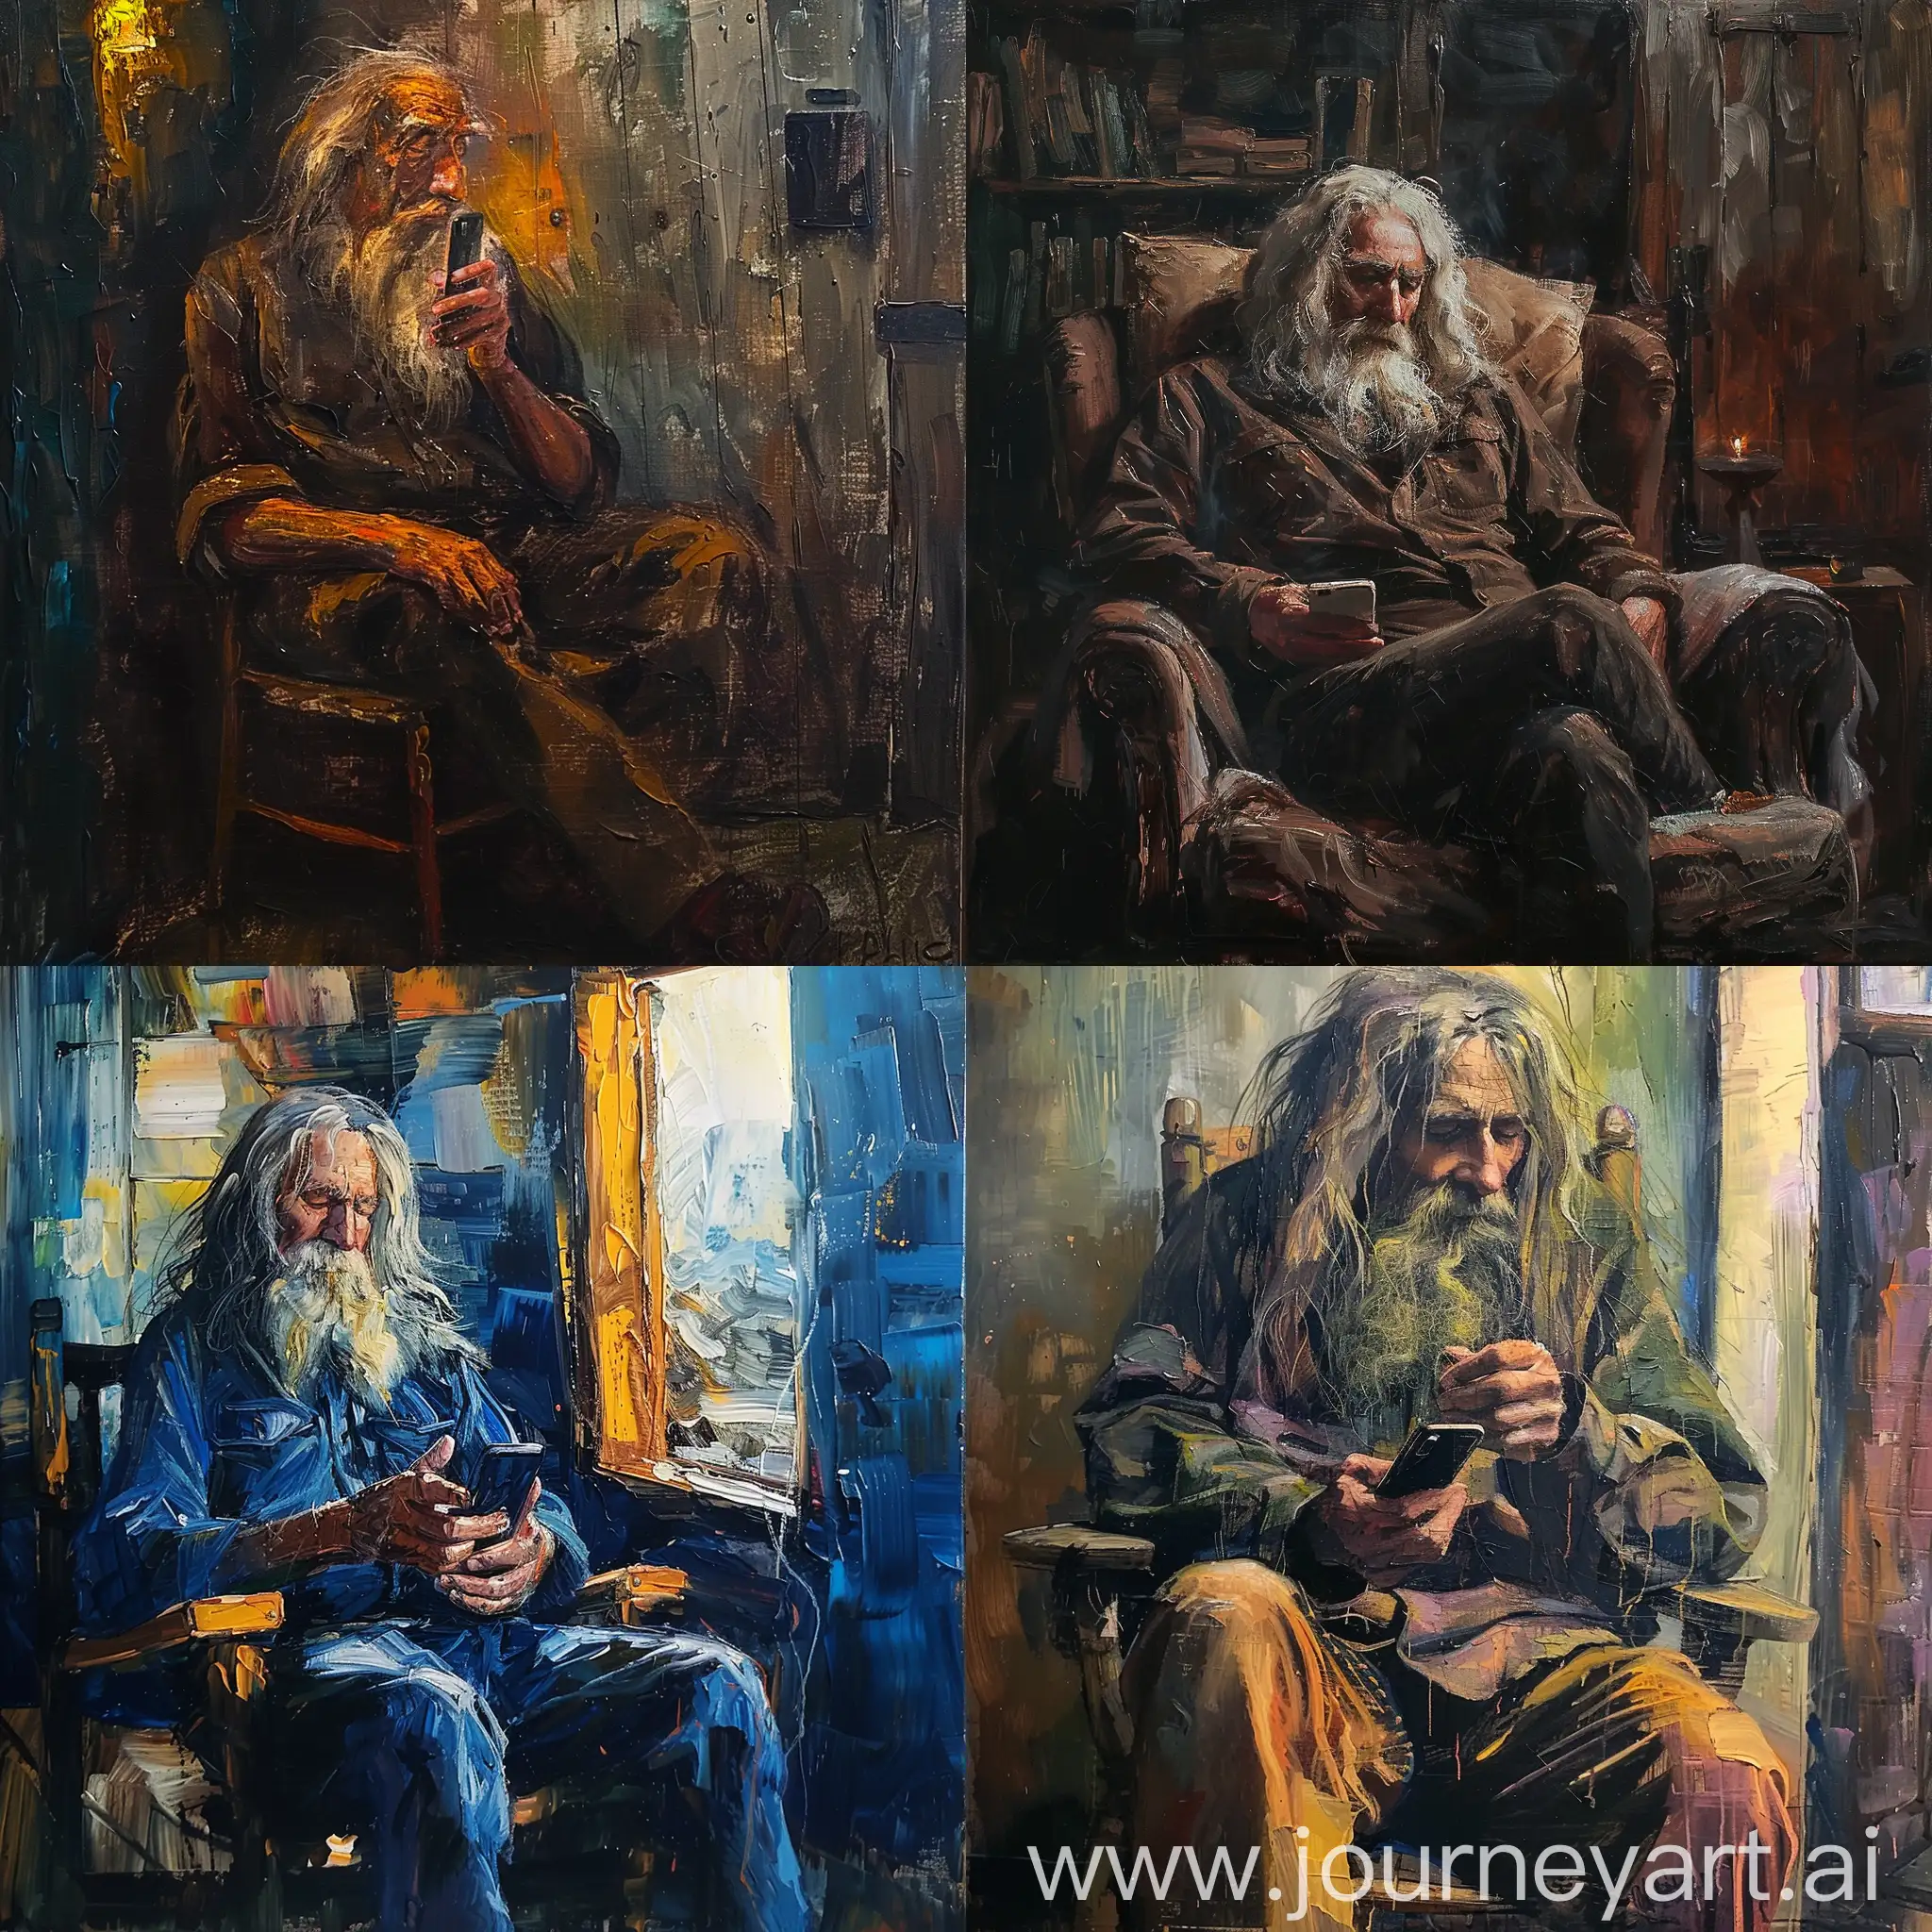 a painting of a old man wiht long hair and beard siting on a chair in the cabin holding his phone, abstract painting, in eugene Delacroix style